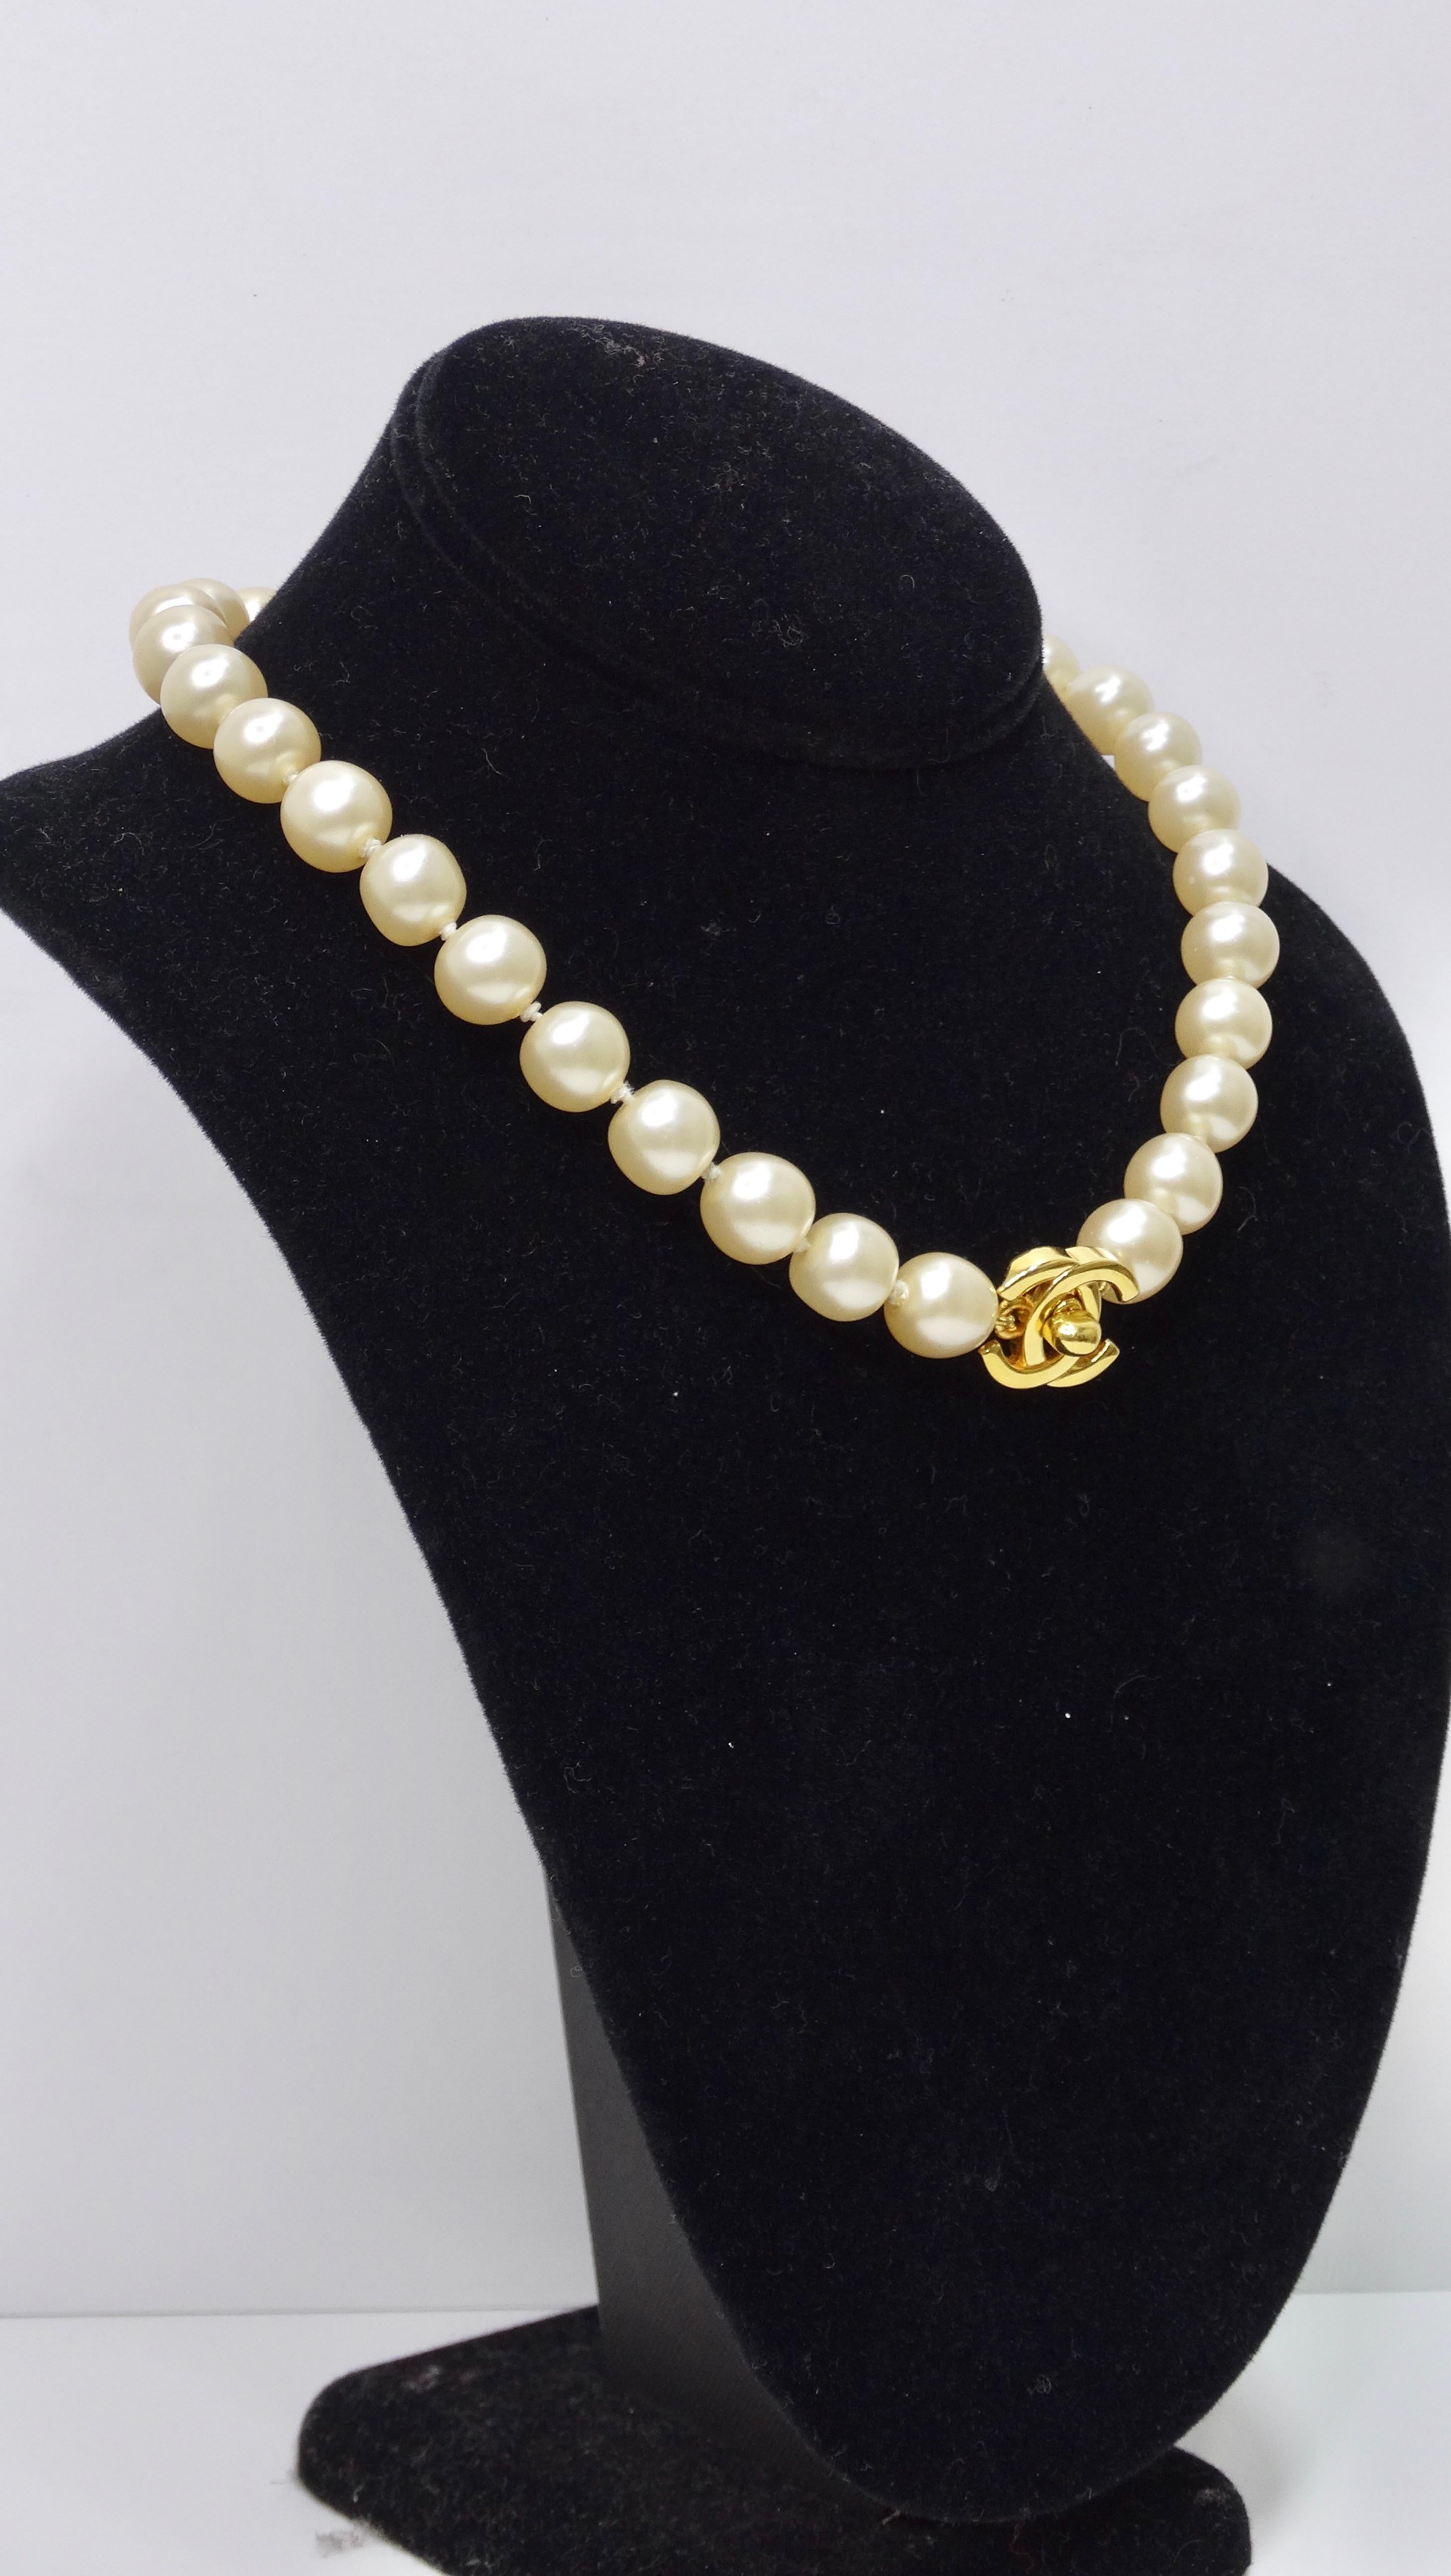 Dip your toe into the world of Chanel with this beautifully classic and highly rare necklace! This is a vintage piece from the 1996 Spring collection that is in pristine condition. It features plump and irregular glass faux peal beads that are